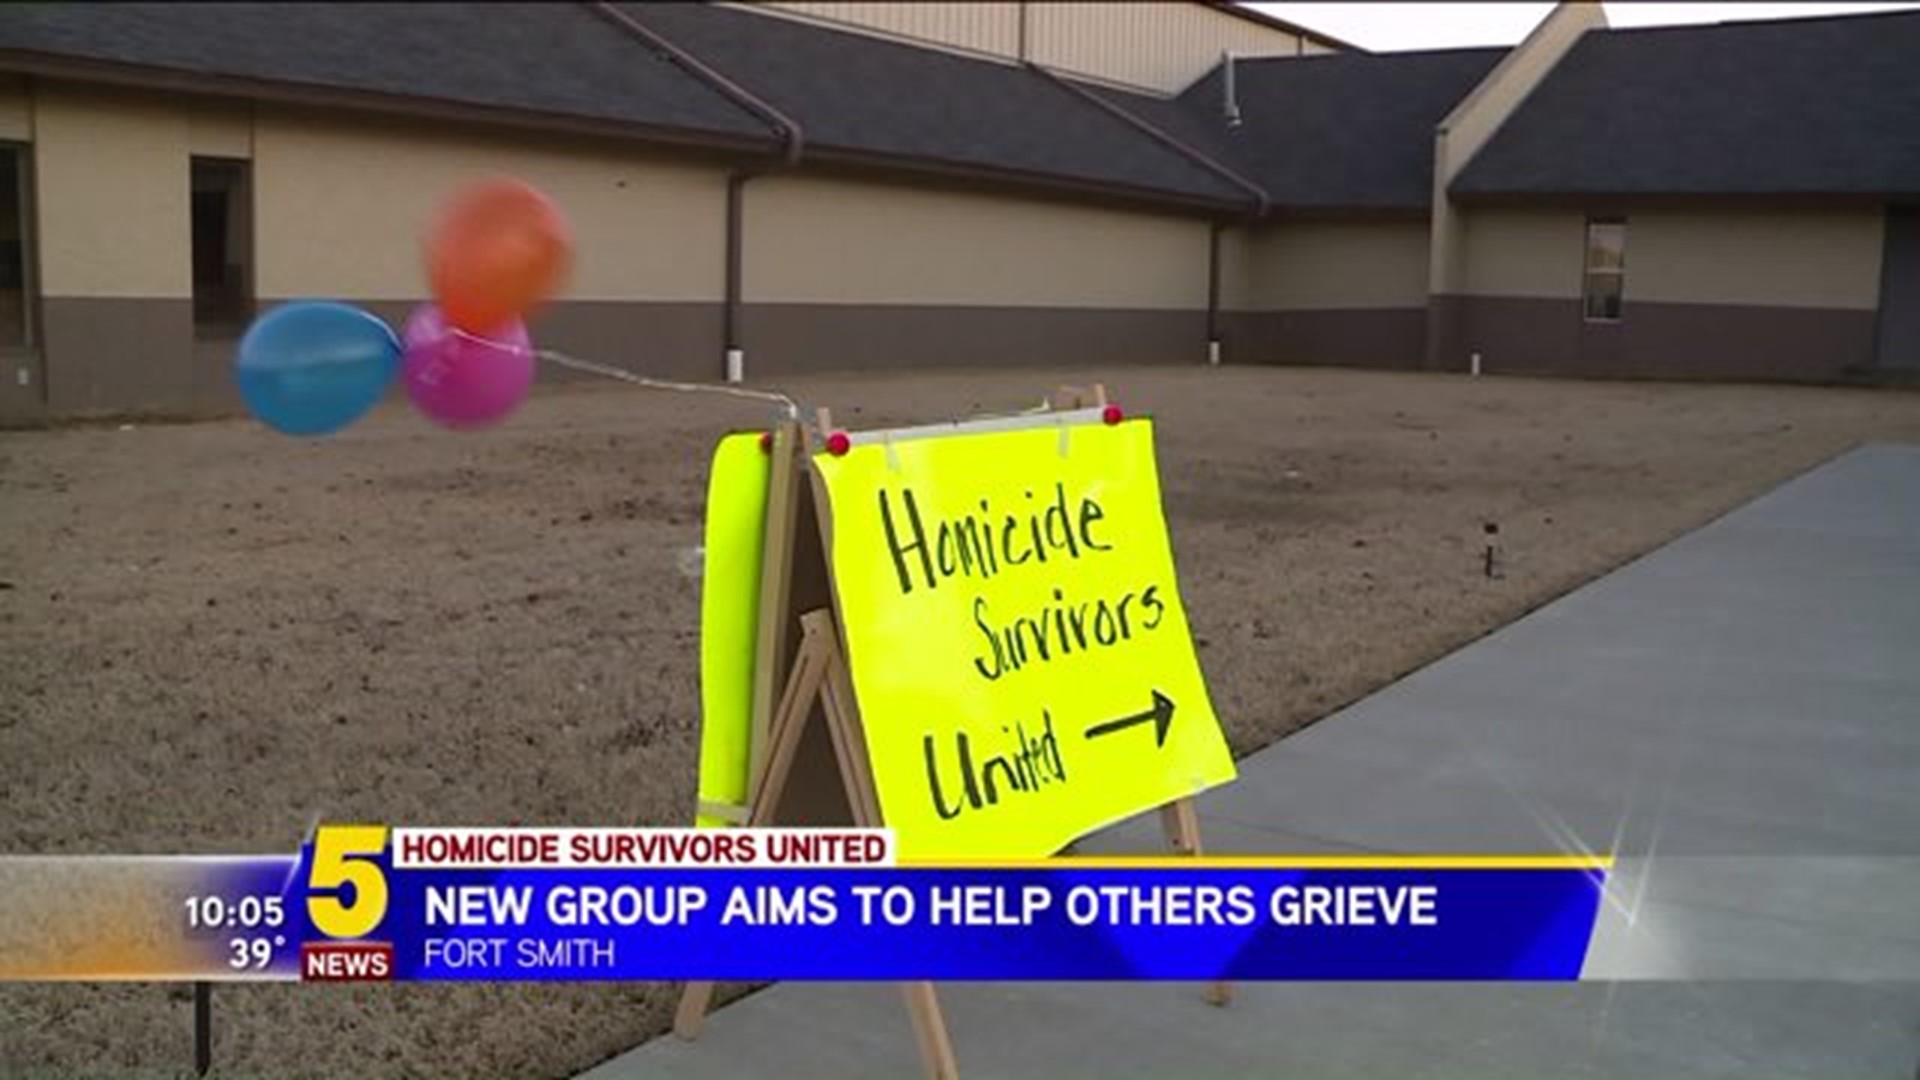 Homicide Survivors United Aims to Help